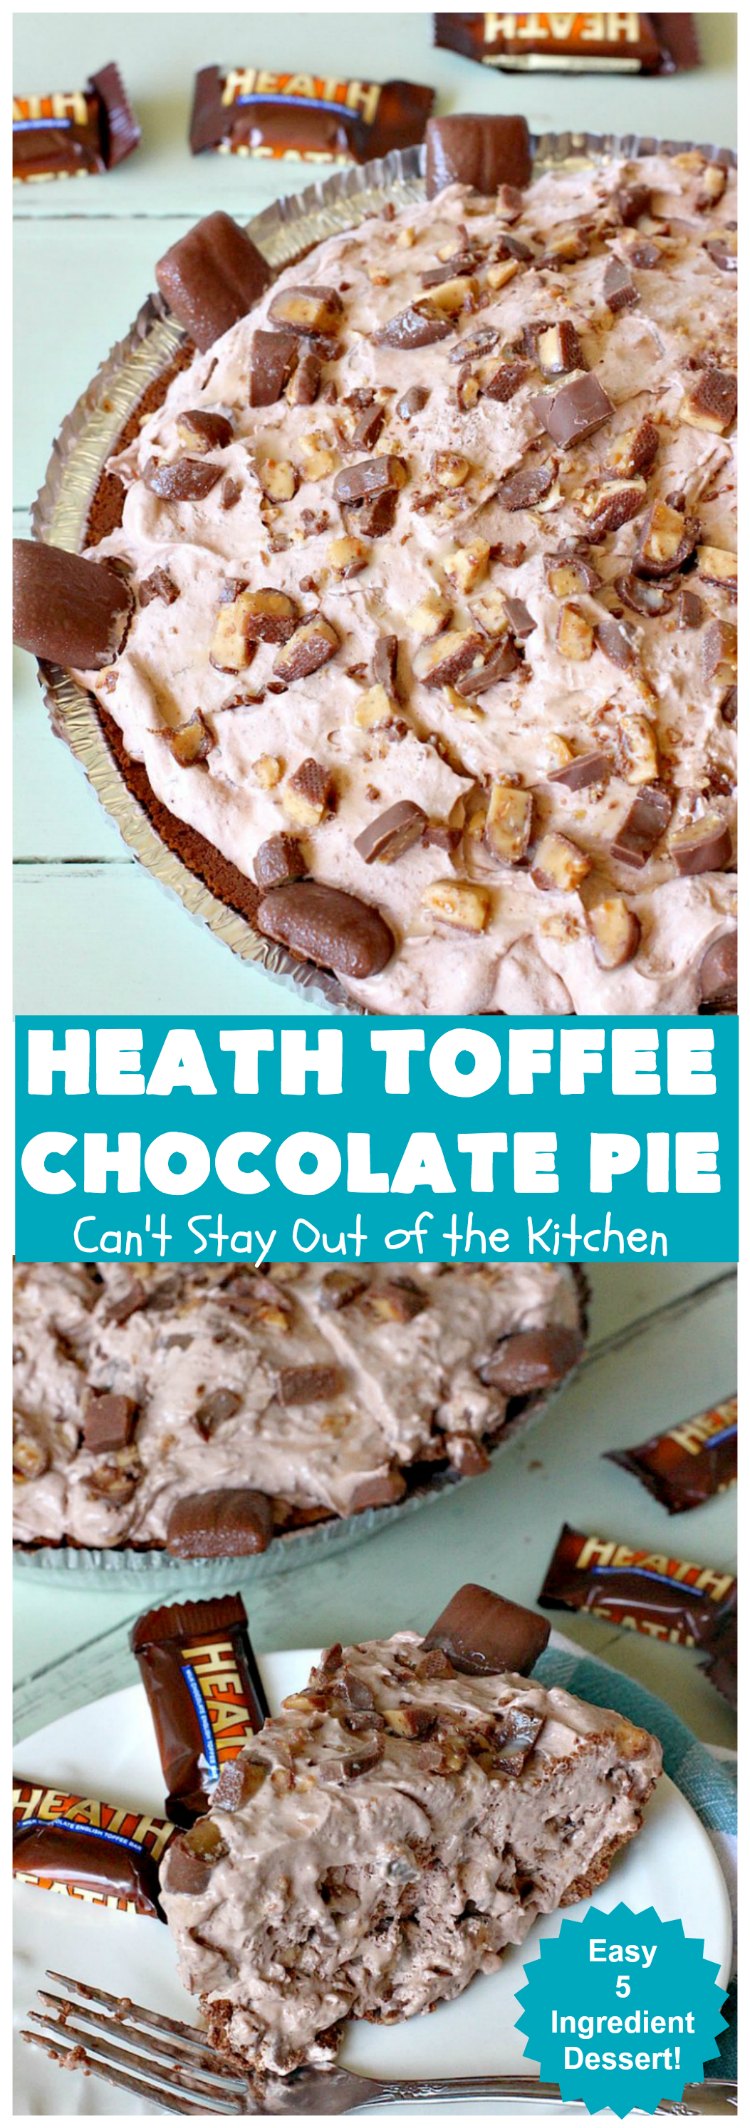 Heath Toffee Chocolate Pie | Can't Stay Out of the Kitchen | this luscious #ChocolatePie is rich, decadent & divine! It uses only 5 ingredients & is perfect for a #holiday or company #dessert #HeathToffeeBars #HeathToffeeChocolatePie #HeathToffeeDessert